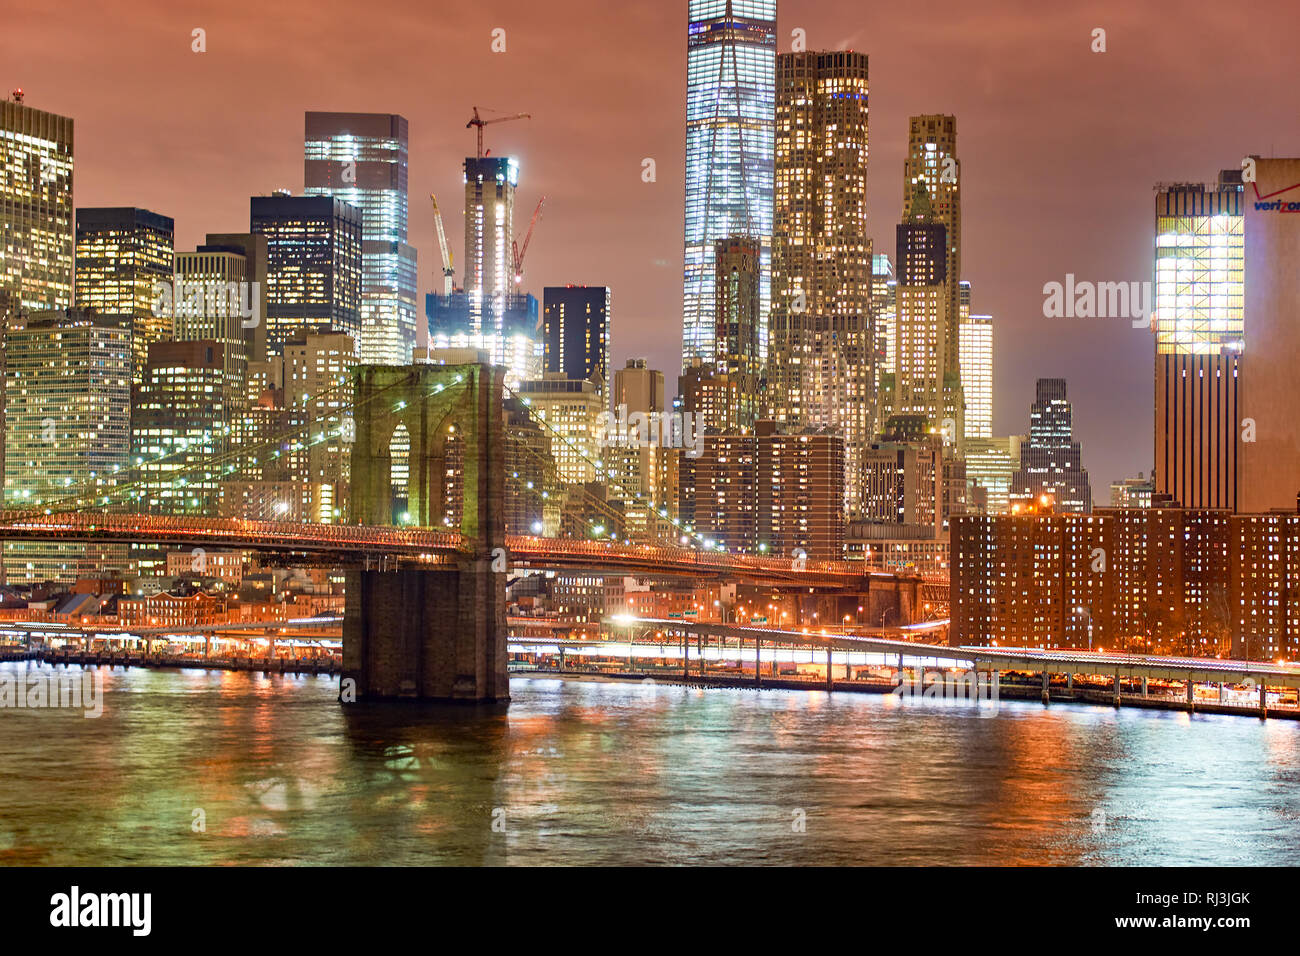 NEW YORK - CIRCA MARCH 2016: view of New-York City from Brooklyn. The City of New York, often called New York City or simply New York, is the most pop Stock Photo